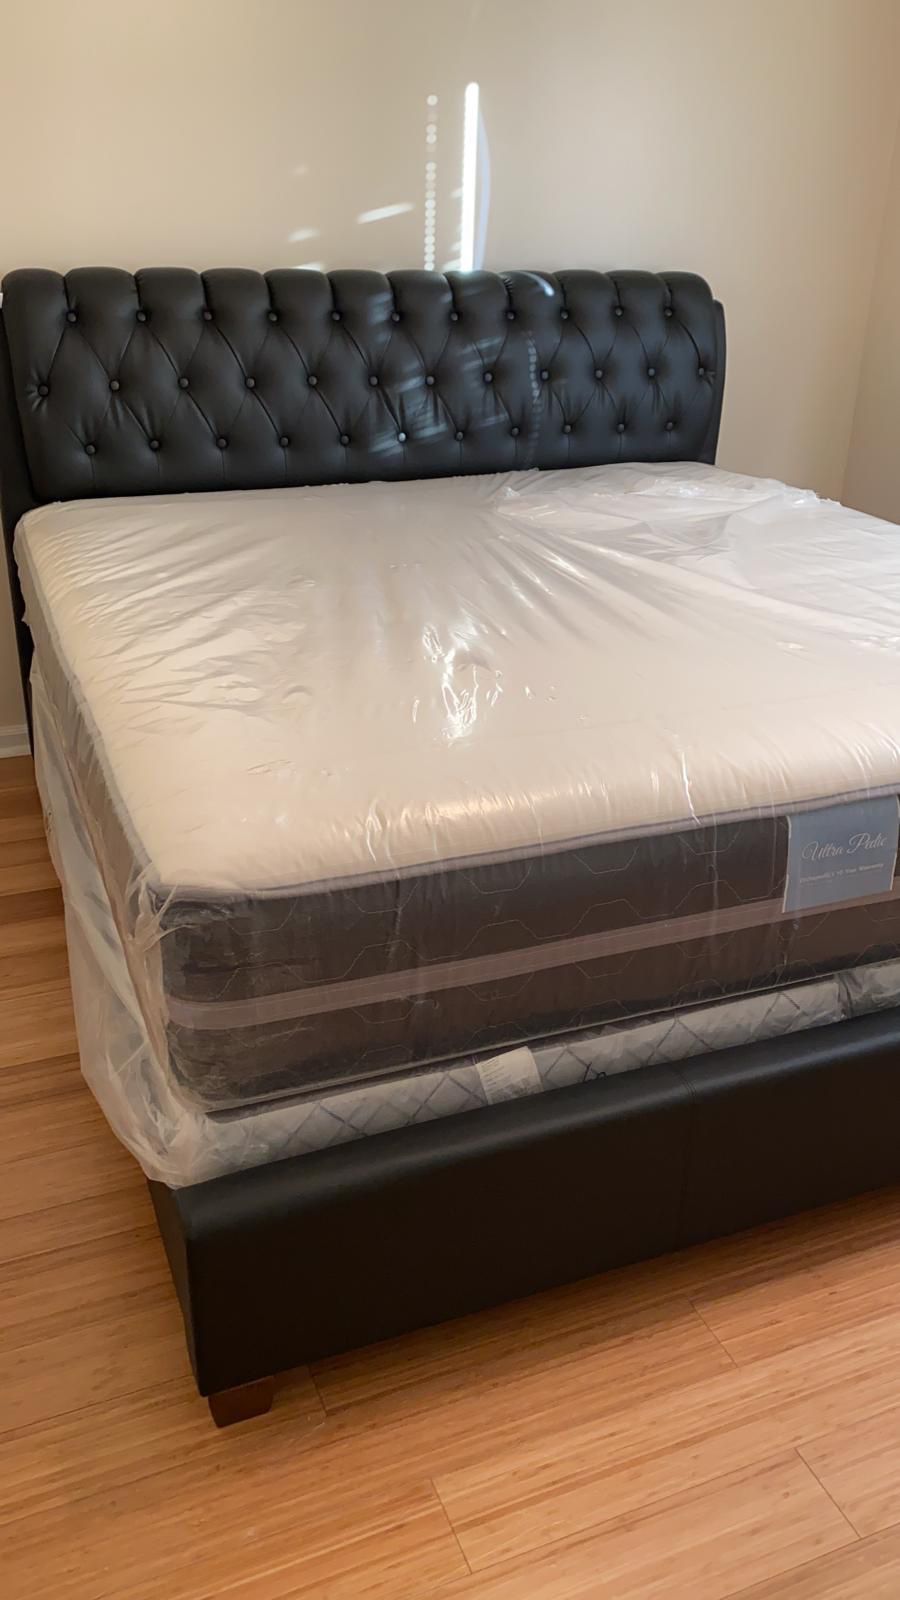 BRAND NEW KING SIZE MATTRESS ORTHOPEDIC MEMORY FOAM + BLACK BED FRAME , UPHOLSTERED BED > FINANCING AVAILABLE